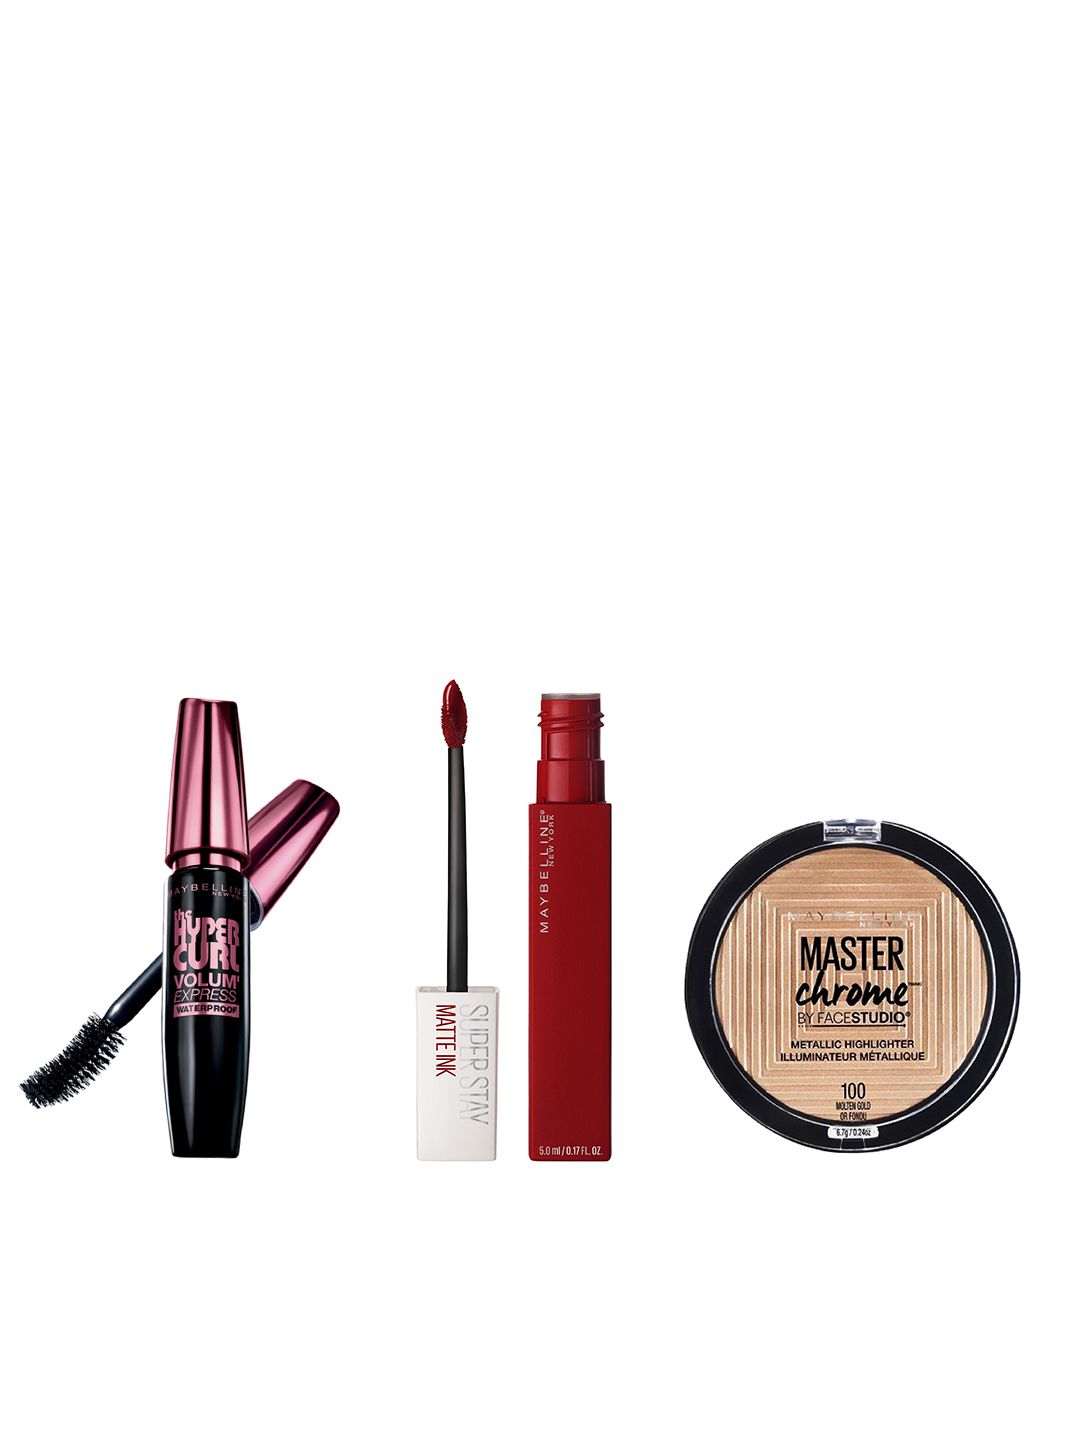 Maybelline Set of 3 Beauty Set Price in India